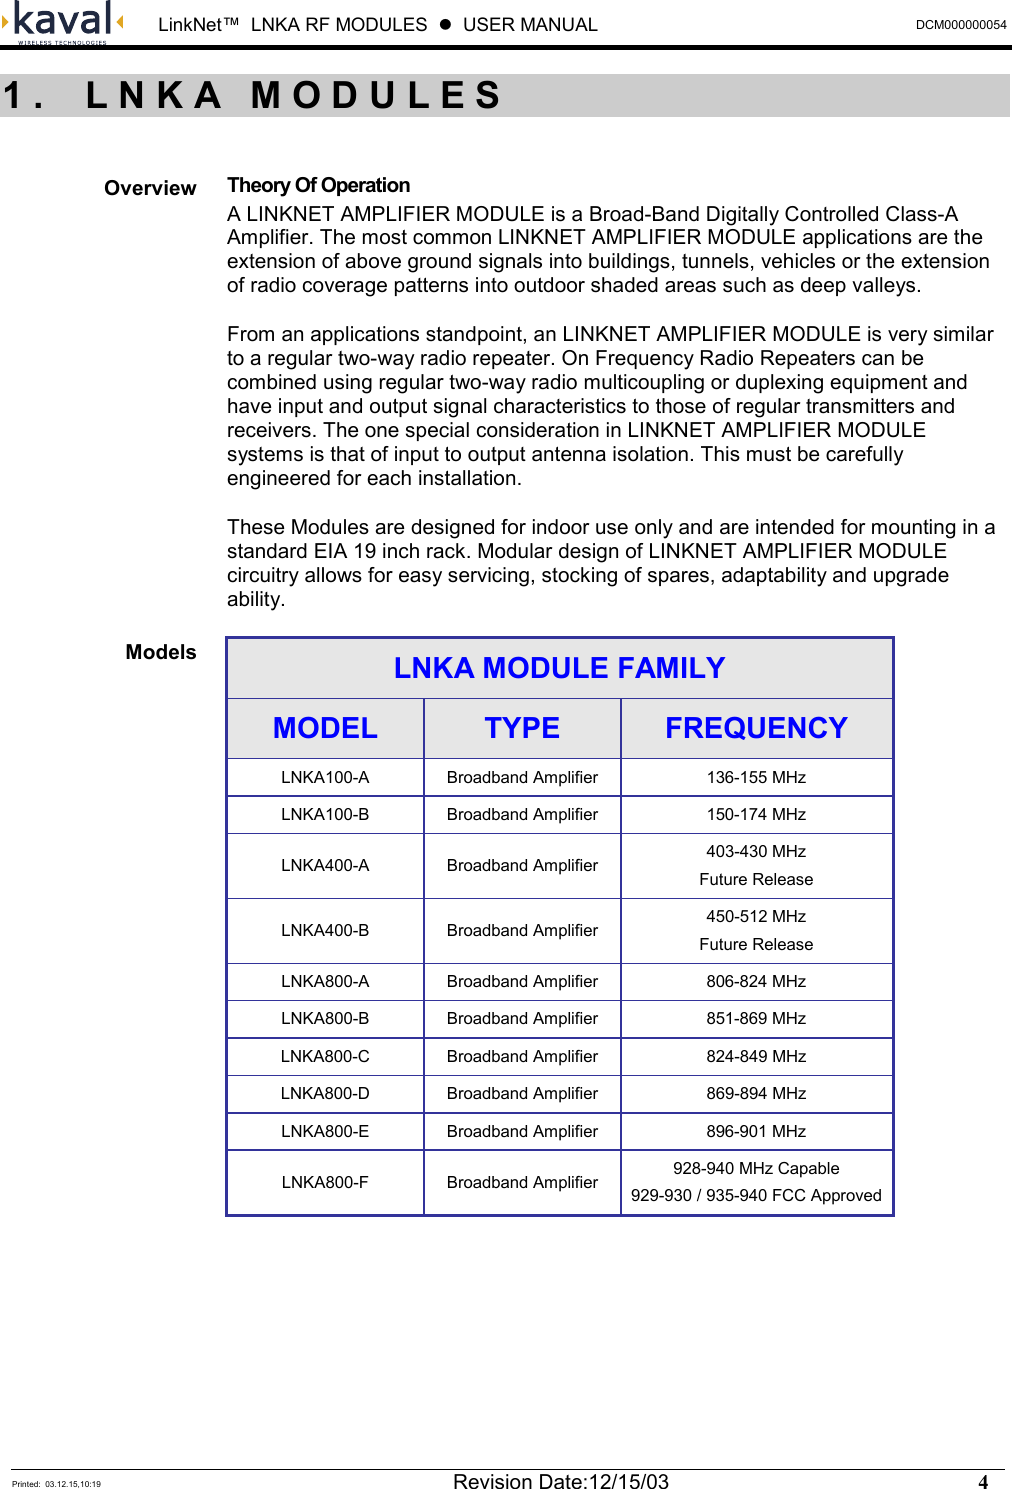  LinkNet™  LNKA RF MODULES  z  USER MANUAL  DCM000000054  Printed:  03.12.15,10:19  Revision Date:12/15/03    4    Theory Of Operation A LINKNET AMPLIFIER MODULE is a Broad-Band Digitally Controlled Class-A Amplifier. The most common LINKNET AMPLIFIER MODULE applications are the extension of above ground signals into buildings, tunnels, vehicles or the extension of radio coverage patterns into outdoor shaded areas such as deep valleys. From an applications standpoint, an LINKNET AMPLIFIER MODULE is very similar to a regular two-way radio repeater. On Frequency Radio Repeaters can be combined using regular two-way radio multicoupling or duplexing equipment and have input and output signal characteristics to those of regular transmitters and receivers. The one special consideration in LINKNET AMPLIFIER MODULE systems is that of input to output antenna isolation. This must be carefully engineered for each installation. These Modules are designed for indoor use only and are intended for mounting in a standard EIA 19 inch rack. Modular design of LINKNET AMPLIFIER MODULE circuitry allows for easy servicing, stocking of spares, adaptability and upgrade ability. LNKA MODULE FAMILY MODEL  TYPE  FREQUENCY LNKA100-A  Broadband Amplifier  136-155 MHz LNKA100-B  Broadband Amplifier  150-174 MHz LNKA400-A Broadband Amplifier  403-430 MHz Future Release LNKA400-B Broadband Amplifier  450-512 MHz Future Release LNKA800-A  Broadband Amplifier  806-824 MHz LNKA800-B  Broadband Amplifier  851-869 MHz LNKA800-C  Broadband Amplifier  824-849 MHz LNKA800-D  Broadband Amplifier  869-894 MHz LNKA800-E  Broadband Amplifier  896-901 MHz LNKA800-F Broadband Amplifier 928-940 MHz Capable 929-930 / 935-940 FCC Approved  1. LNKA MODULESOverview Models 